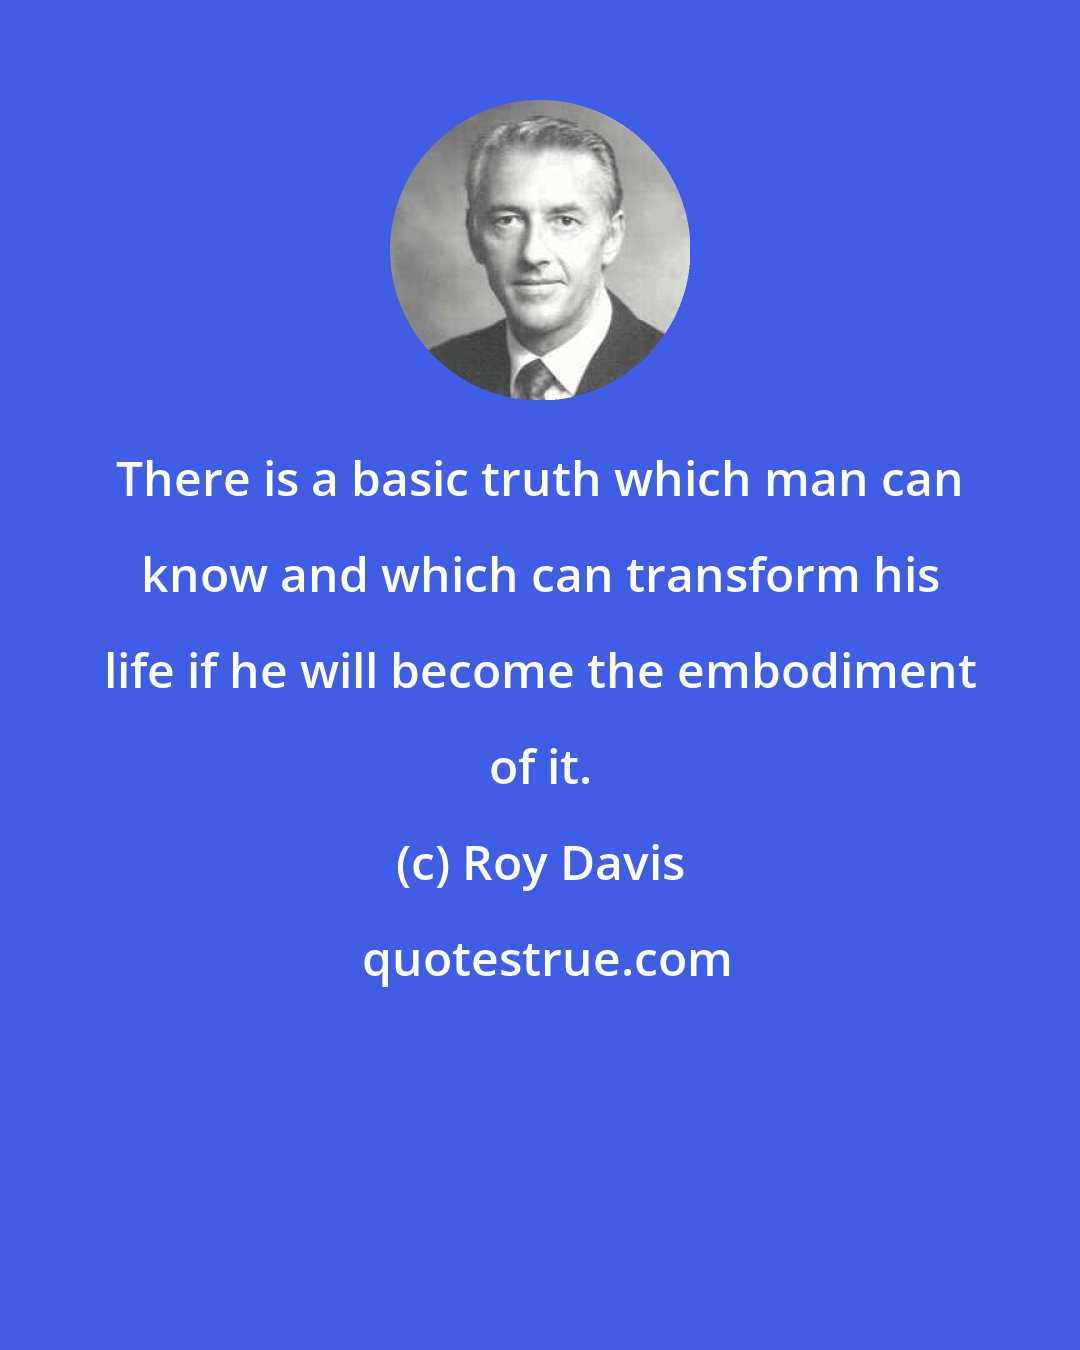 Roy Davis: There is a basic truth which man can know and which can transform his life if he will become the embodiment of it.